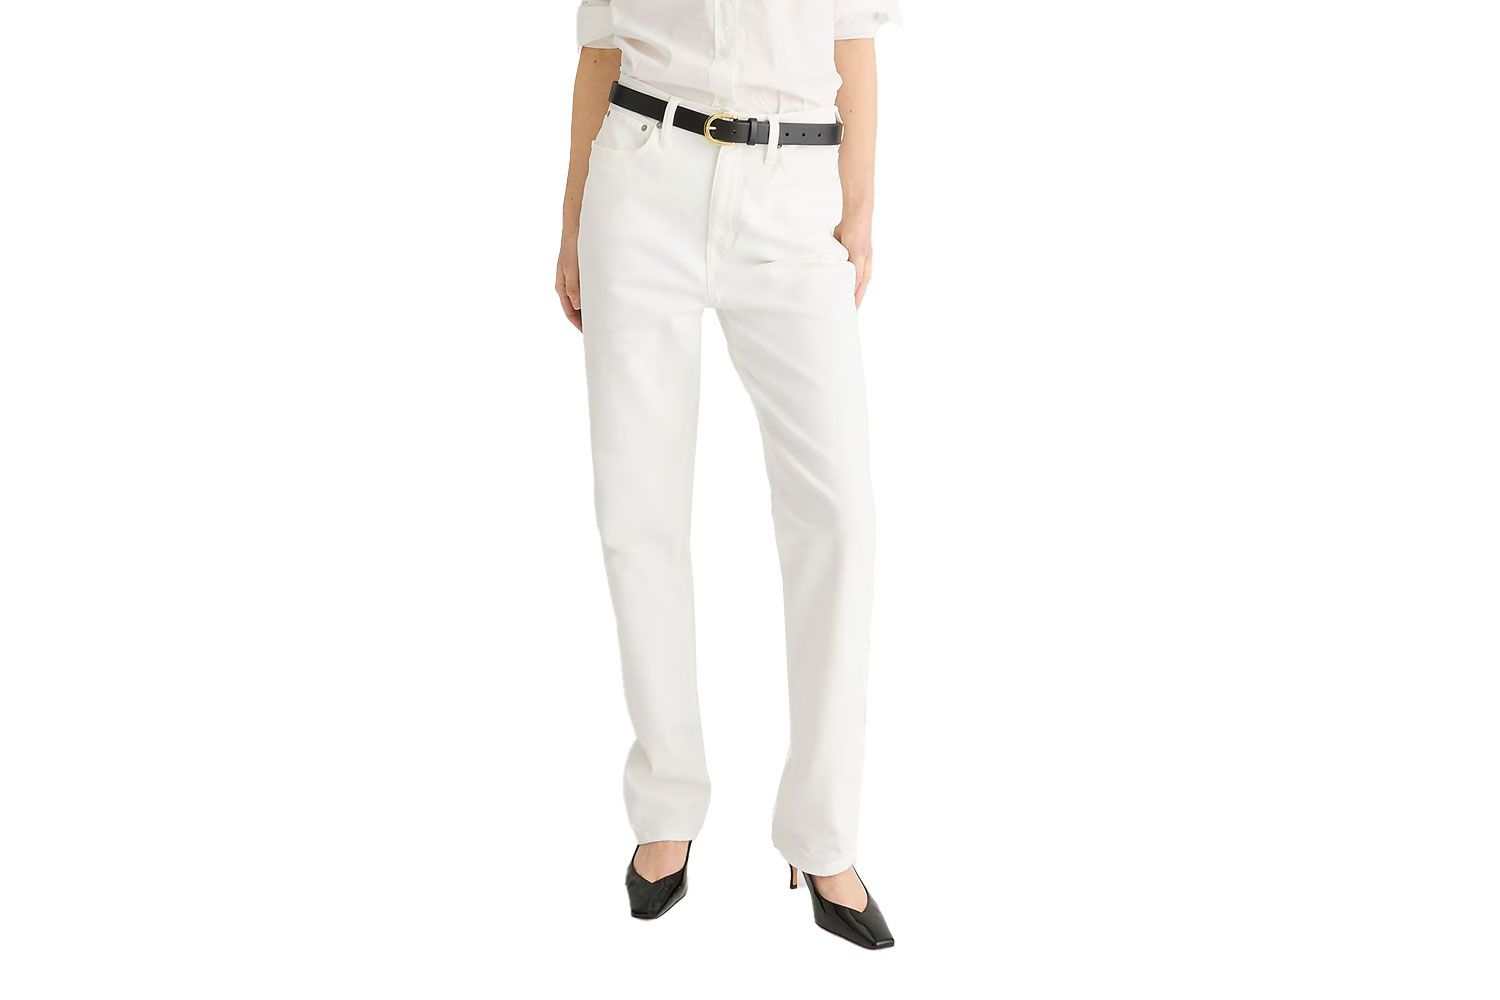 J.Crew Tall Classic Straight Jean in White